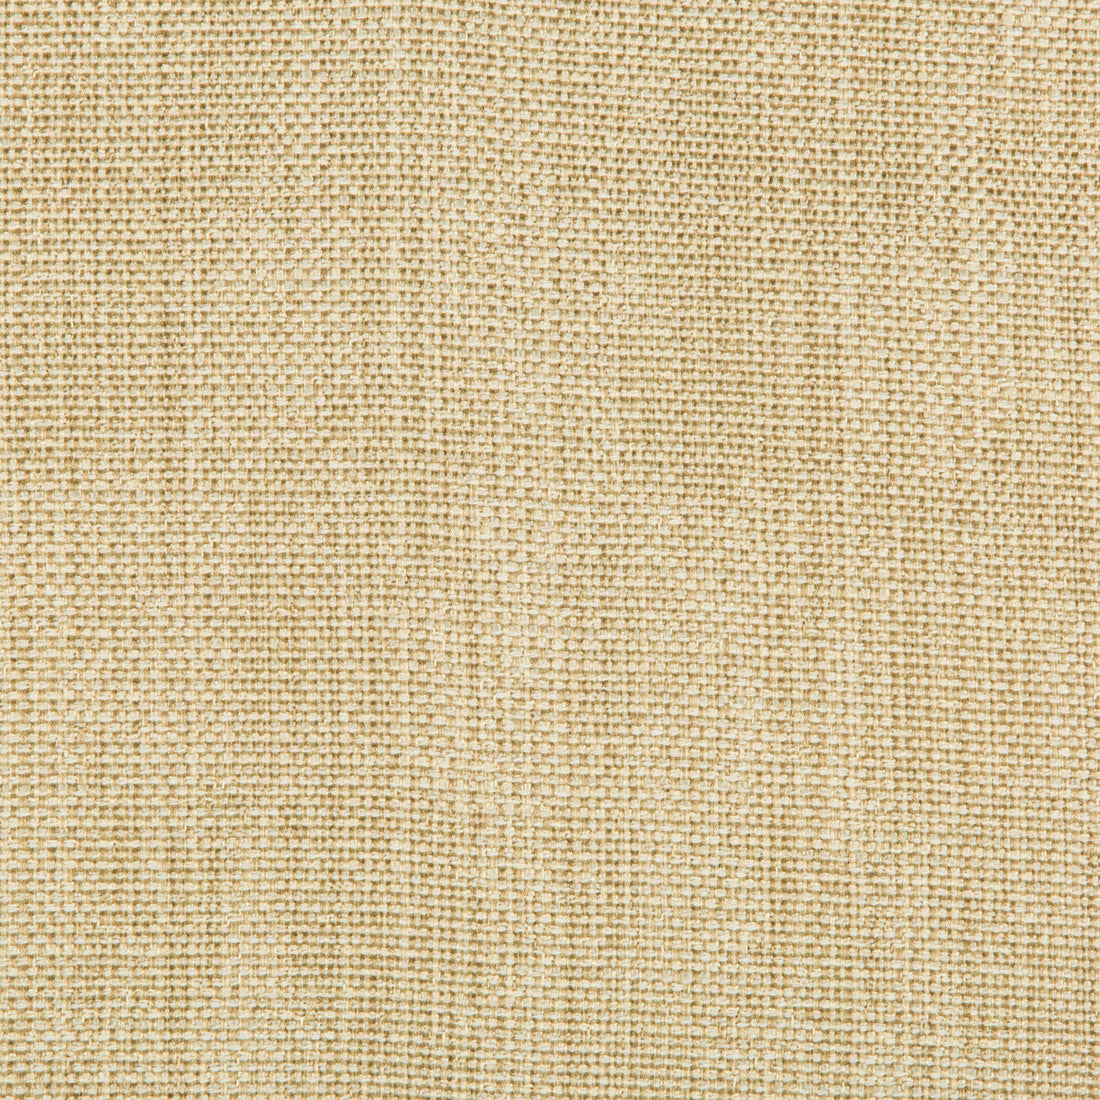 Kravet Contract fabric in 35132-4 color - pattern 35132.4.0 - by Kravet Contract in the Incase Crypton Gis collection